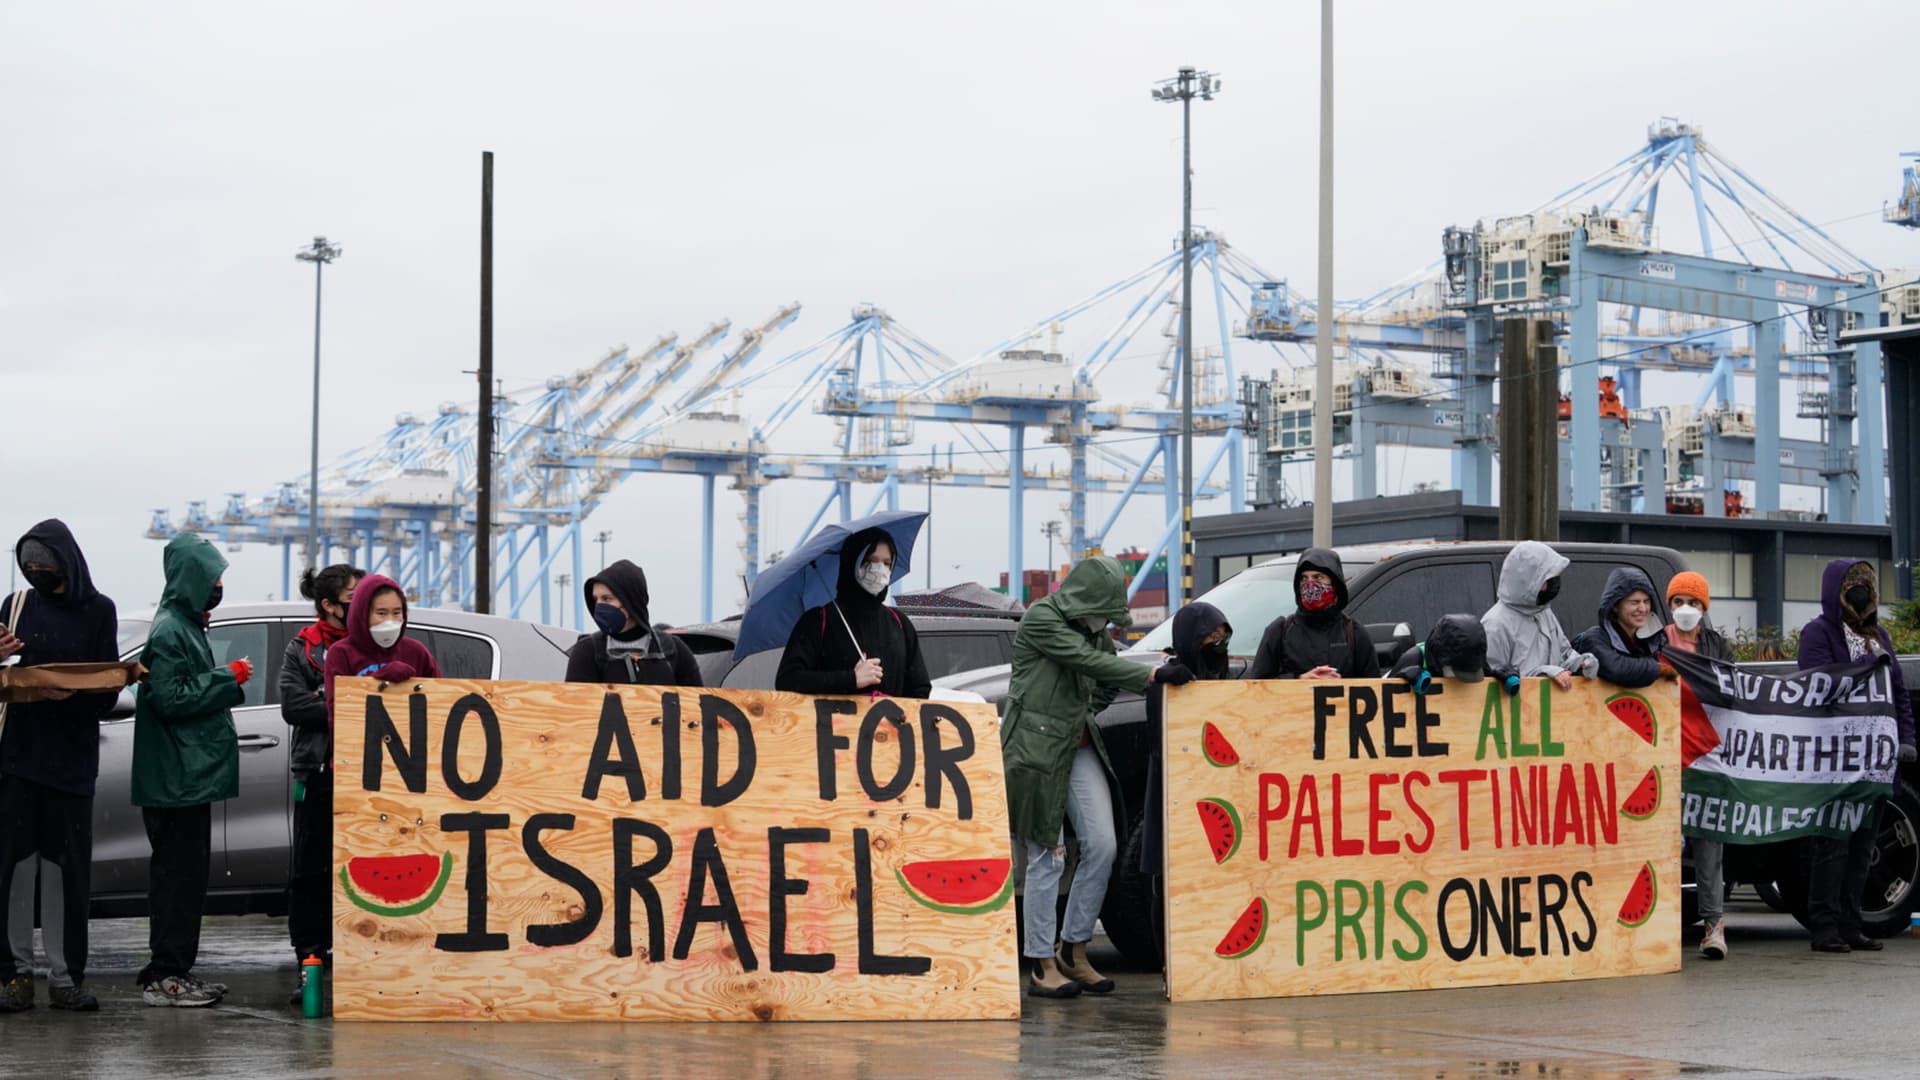 Pro-Palestinian protesters block access to an entry point at the Port of Tacoma in Tacoma, Washington, US, on Monday, Nov. 6, 2023. The protesters are demonstrating what they believe is a military supply ship that is docked at the port and bound for Israel, according to the Seattle Times. Photographer: M. Scott Brauer/Bloomberg via Getty Images